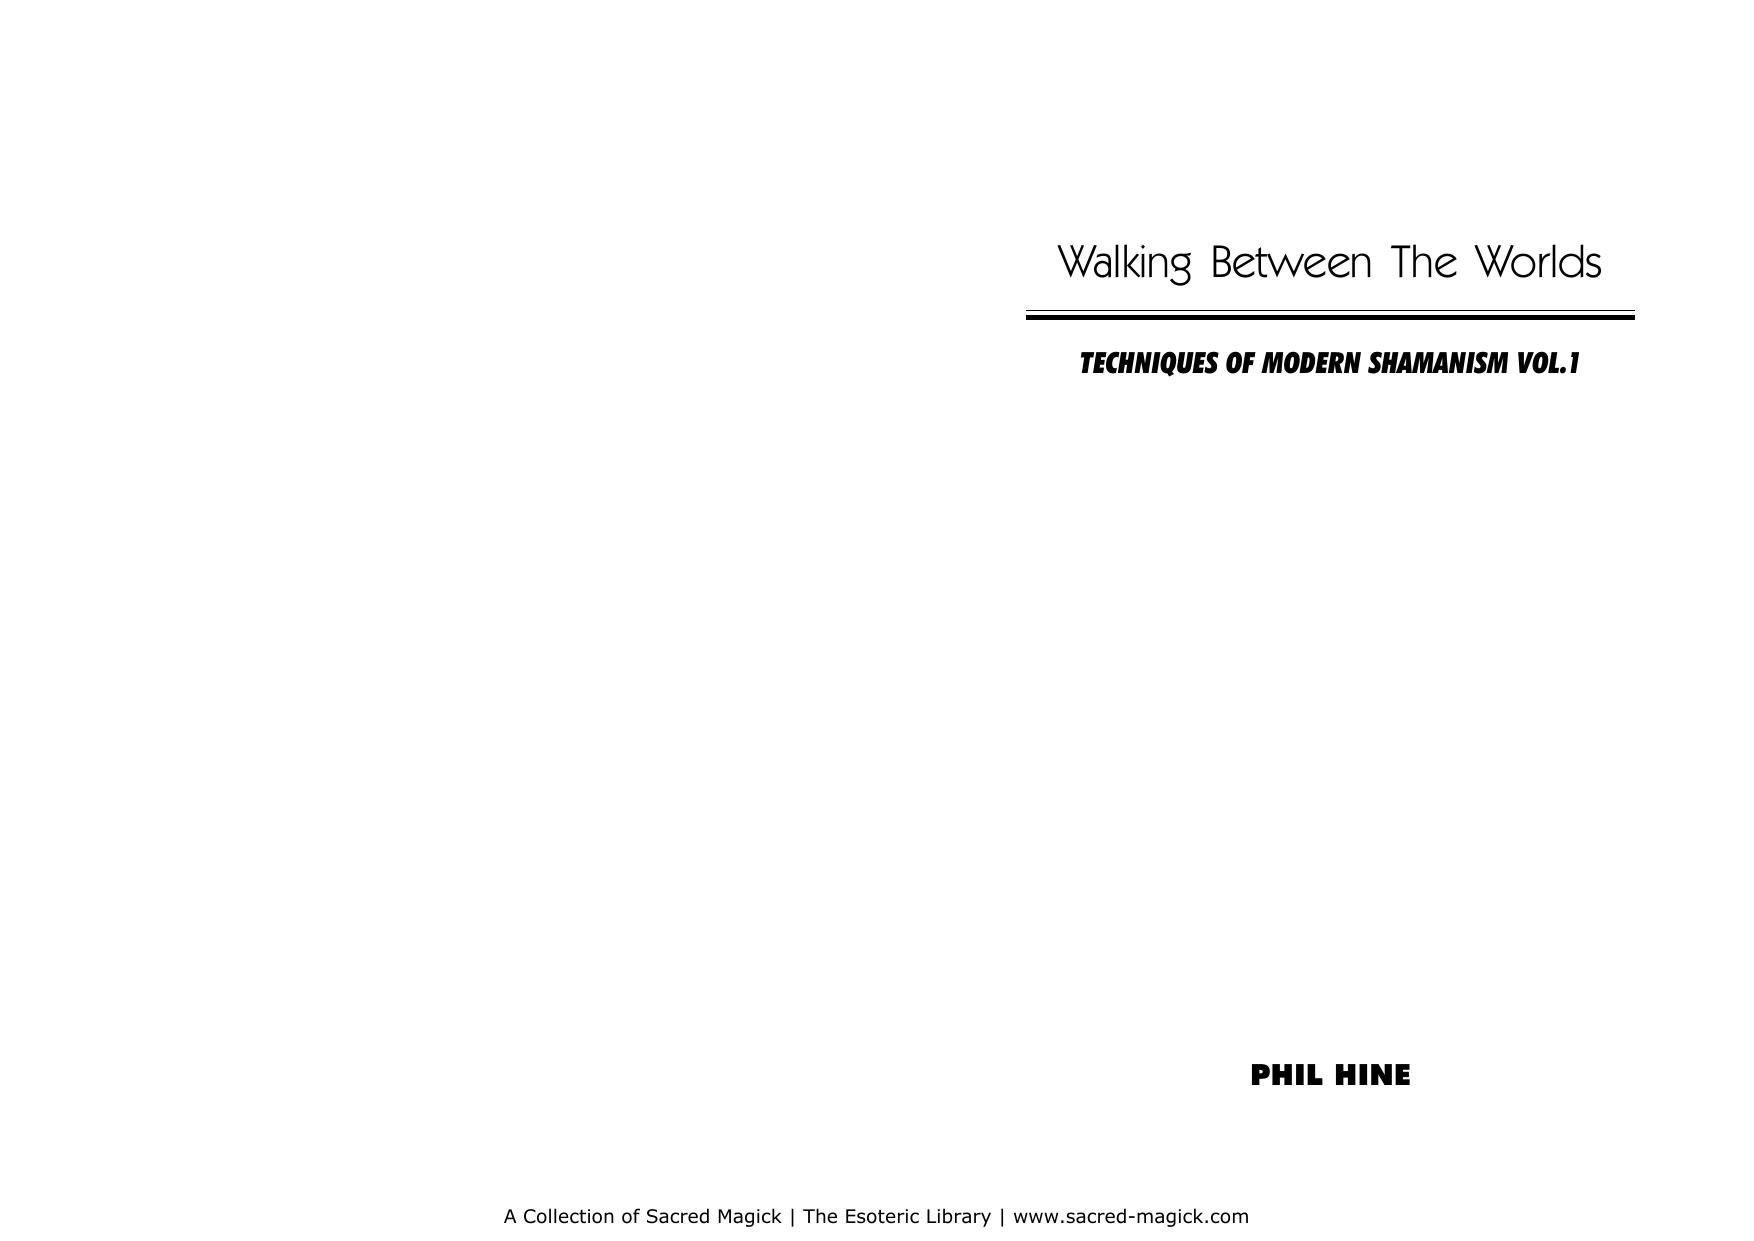 Walking Between the Worlds by Sacred Magick